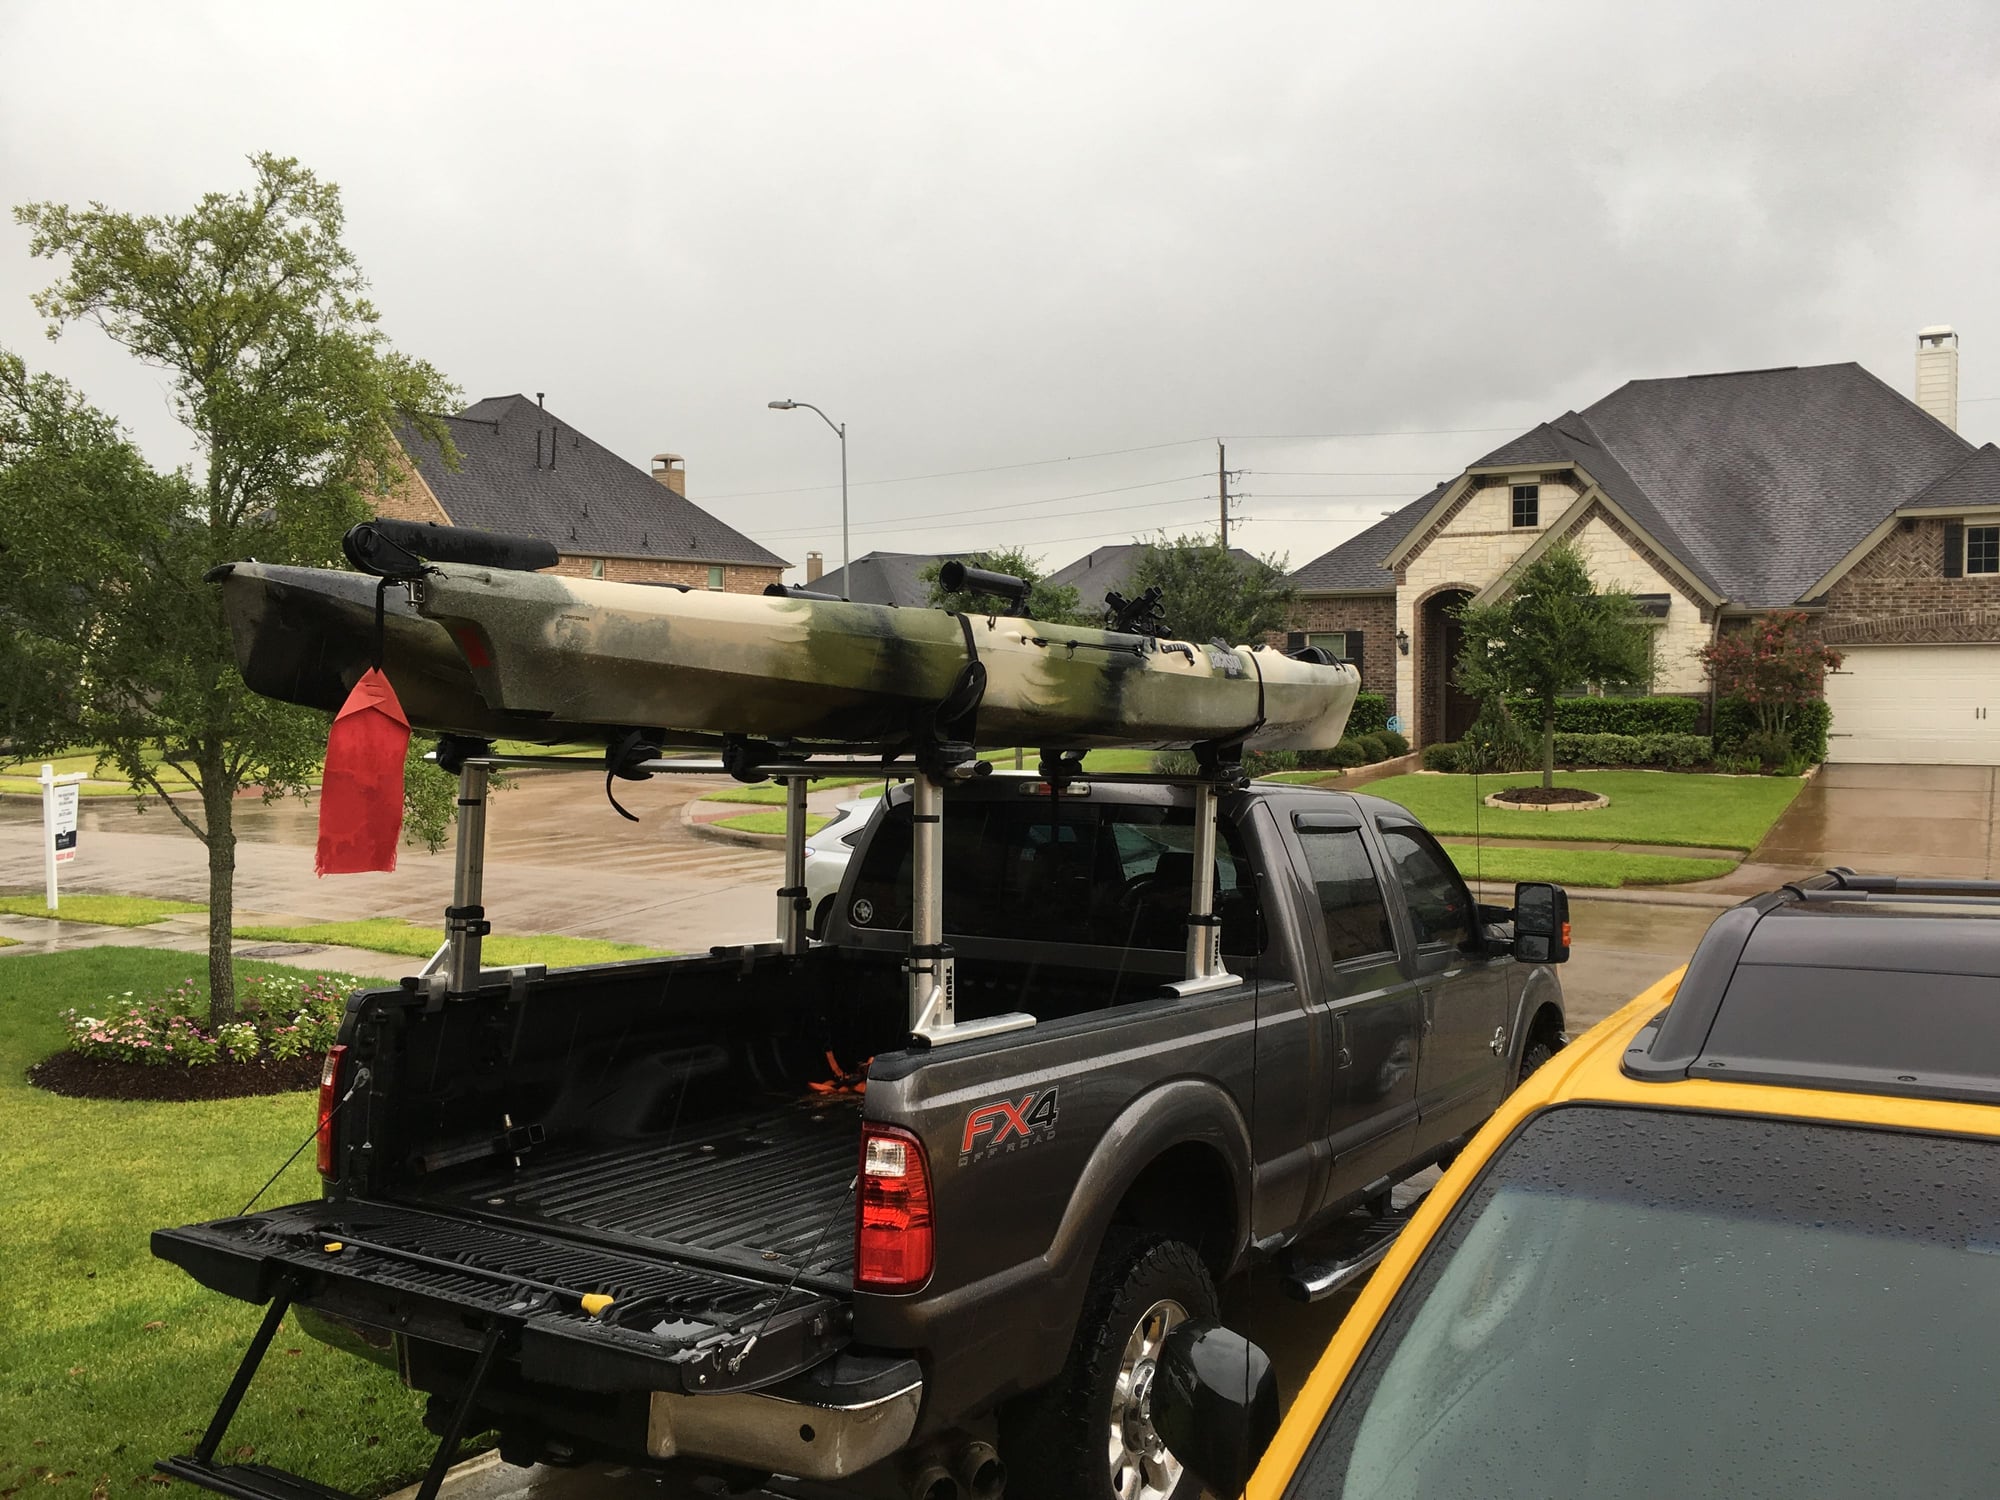 How do you transport your Kayaks? - Page 7 - Ford F150 Forum - Community of  Ford Truck Fans